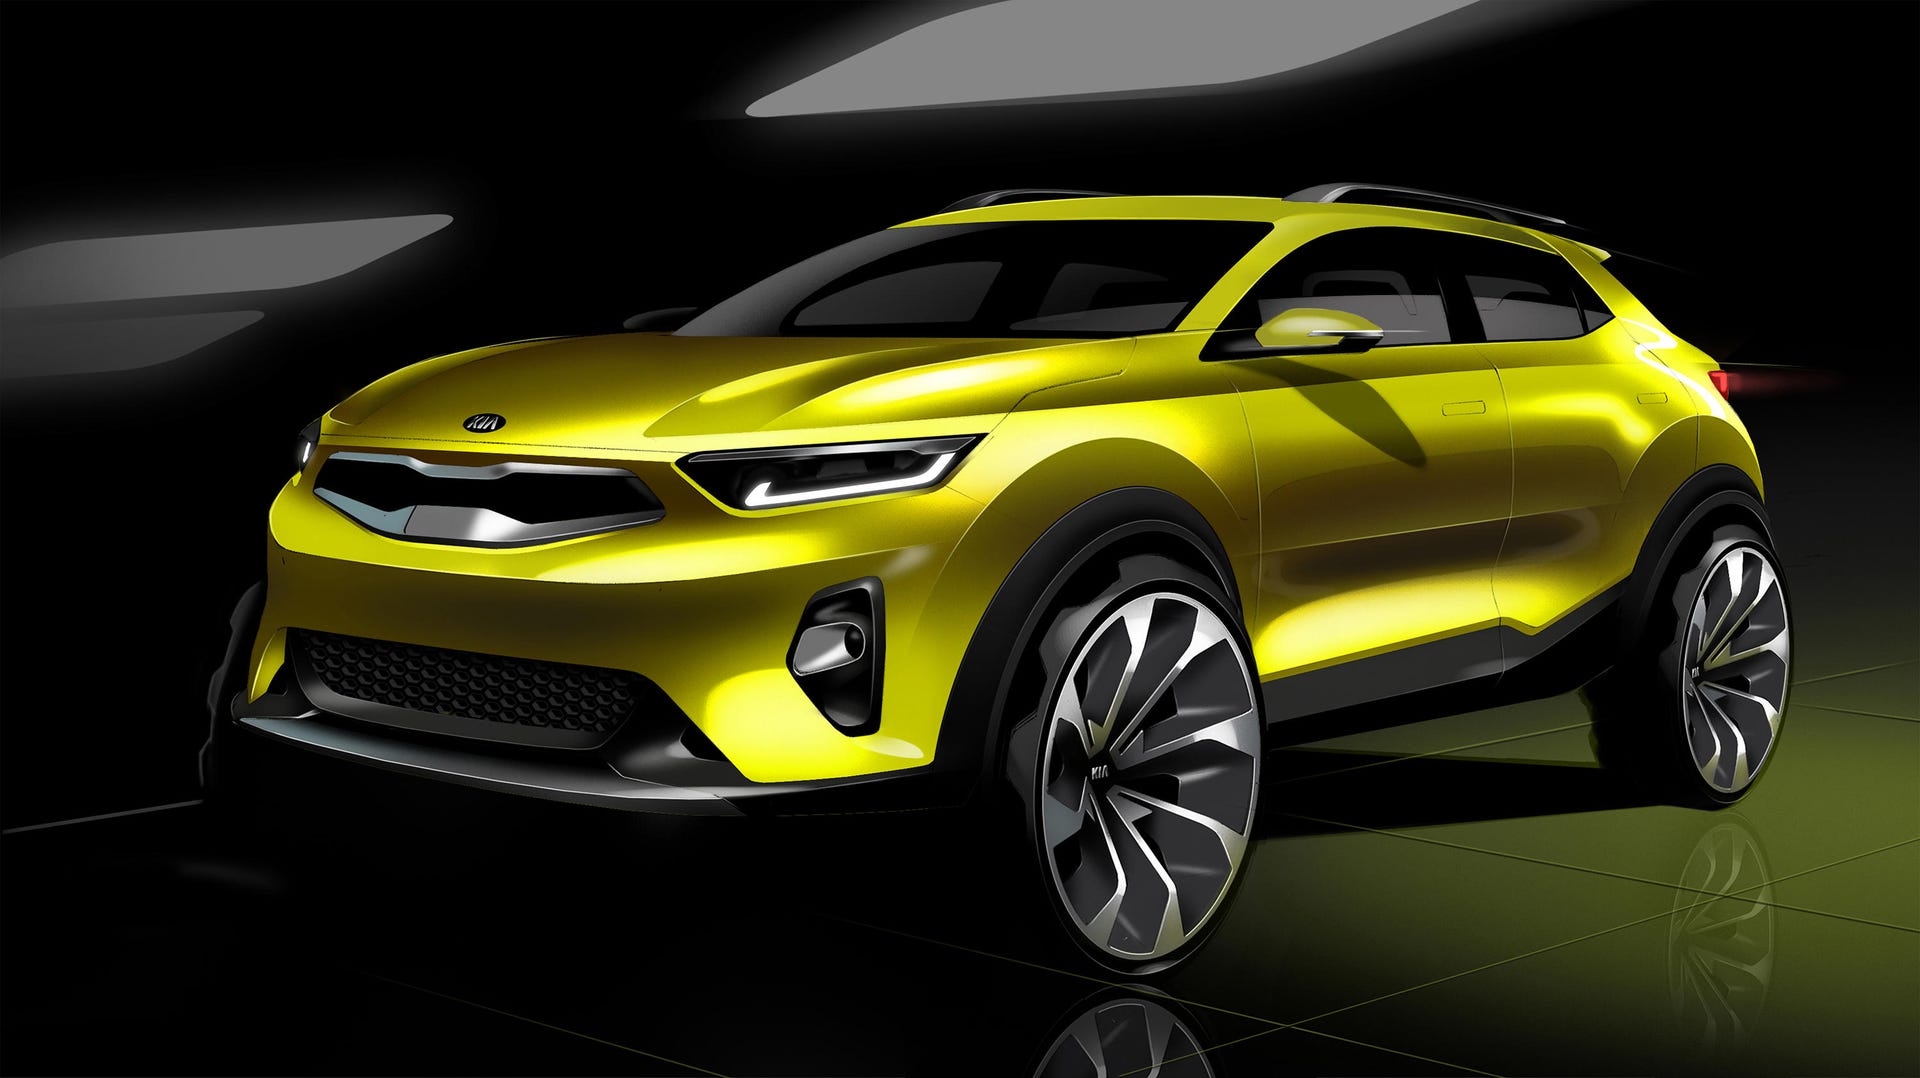 Stonic: Kia's new crossover packs weird name, rugged look - CNET